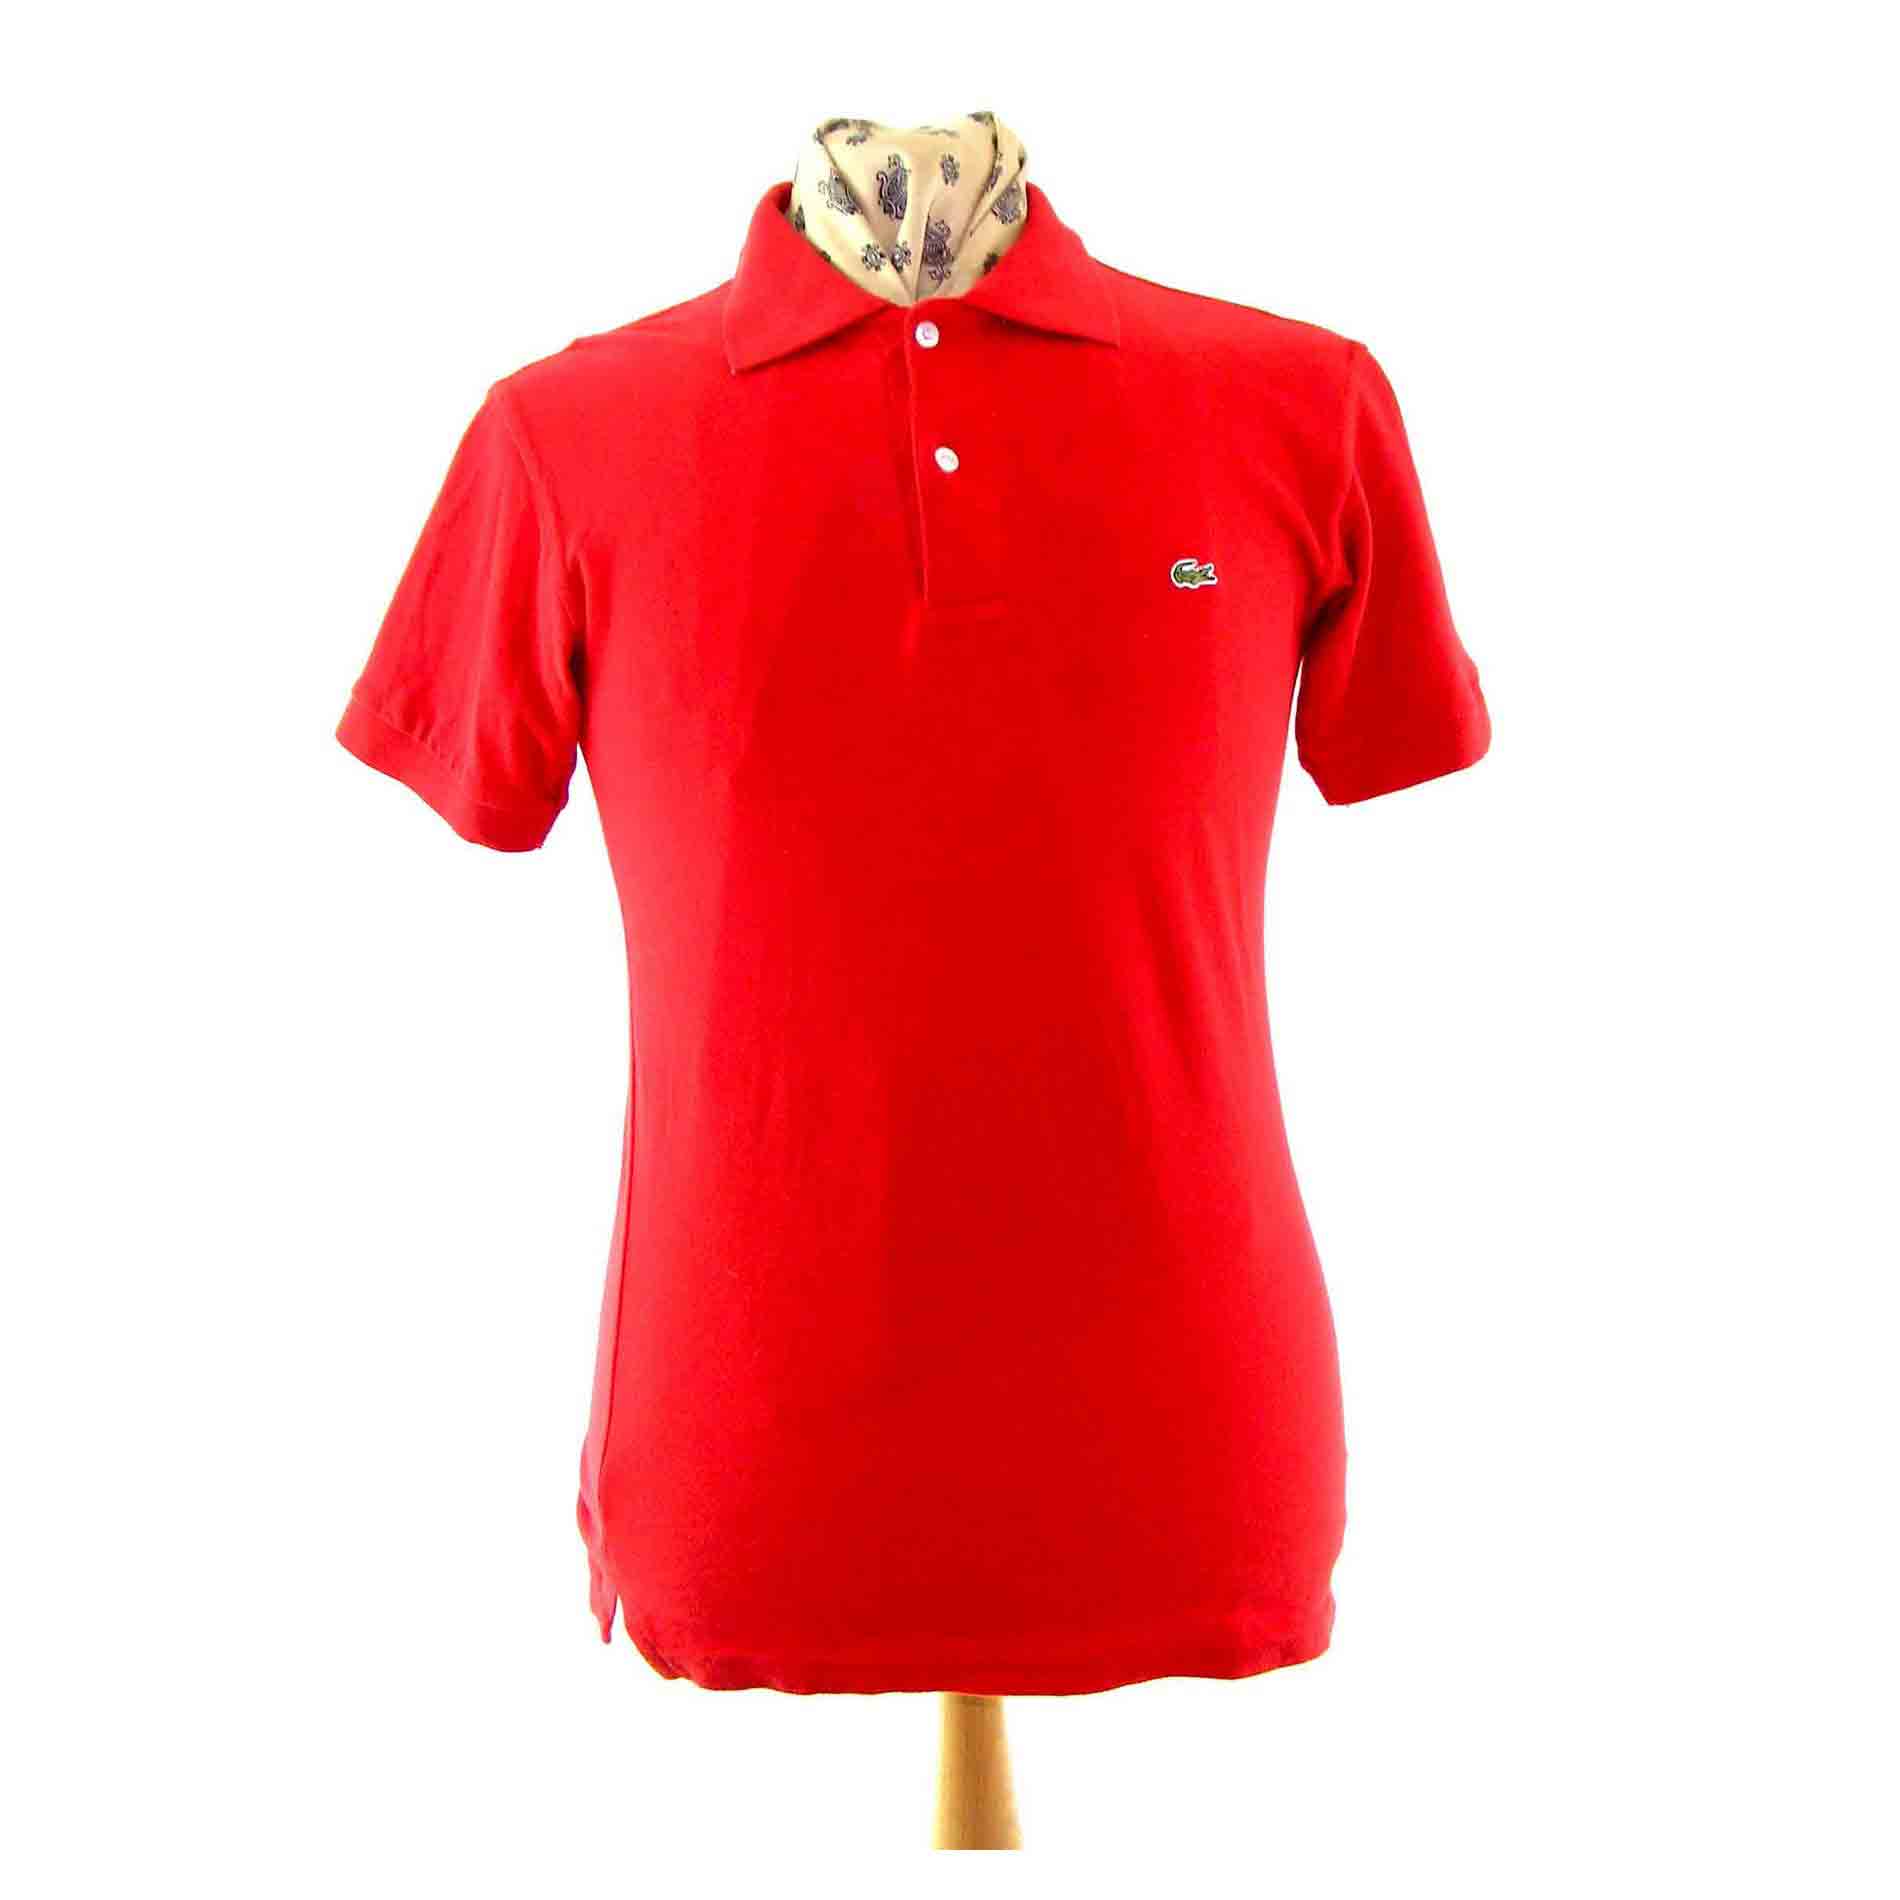 Boston red Lacoste polo shirt - Blue 17 Vintage Clothing